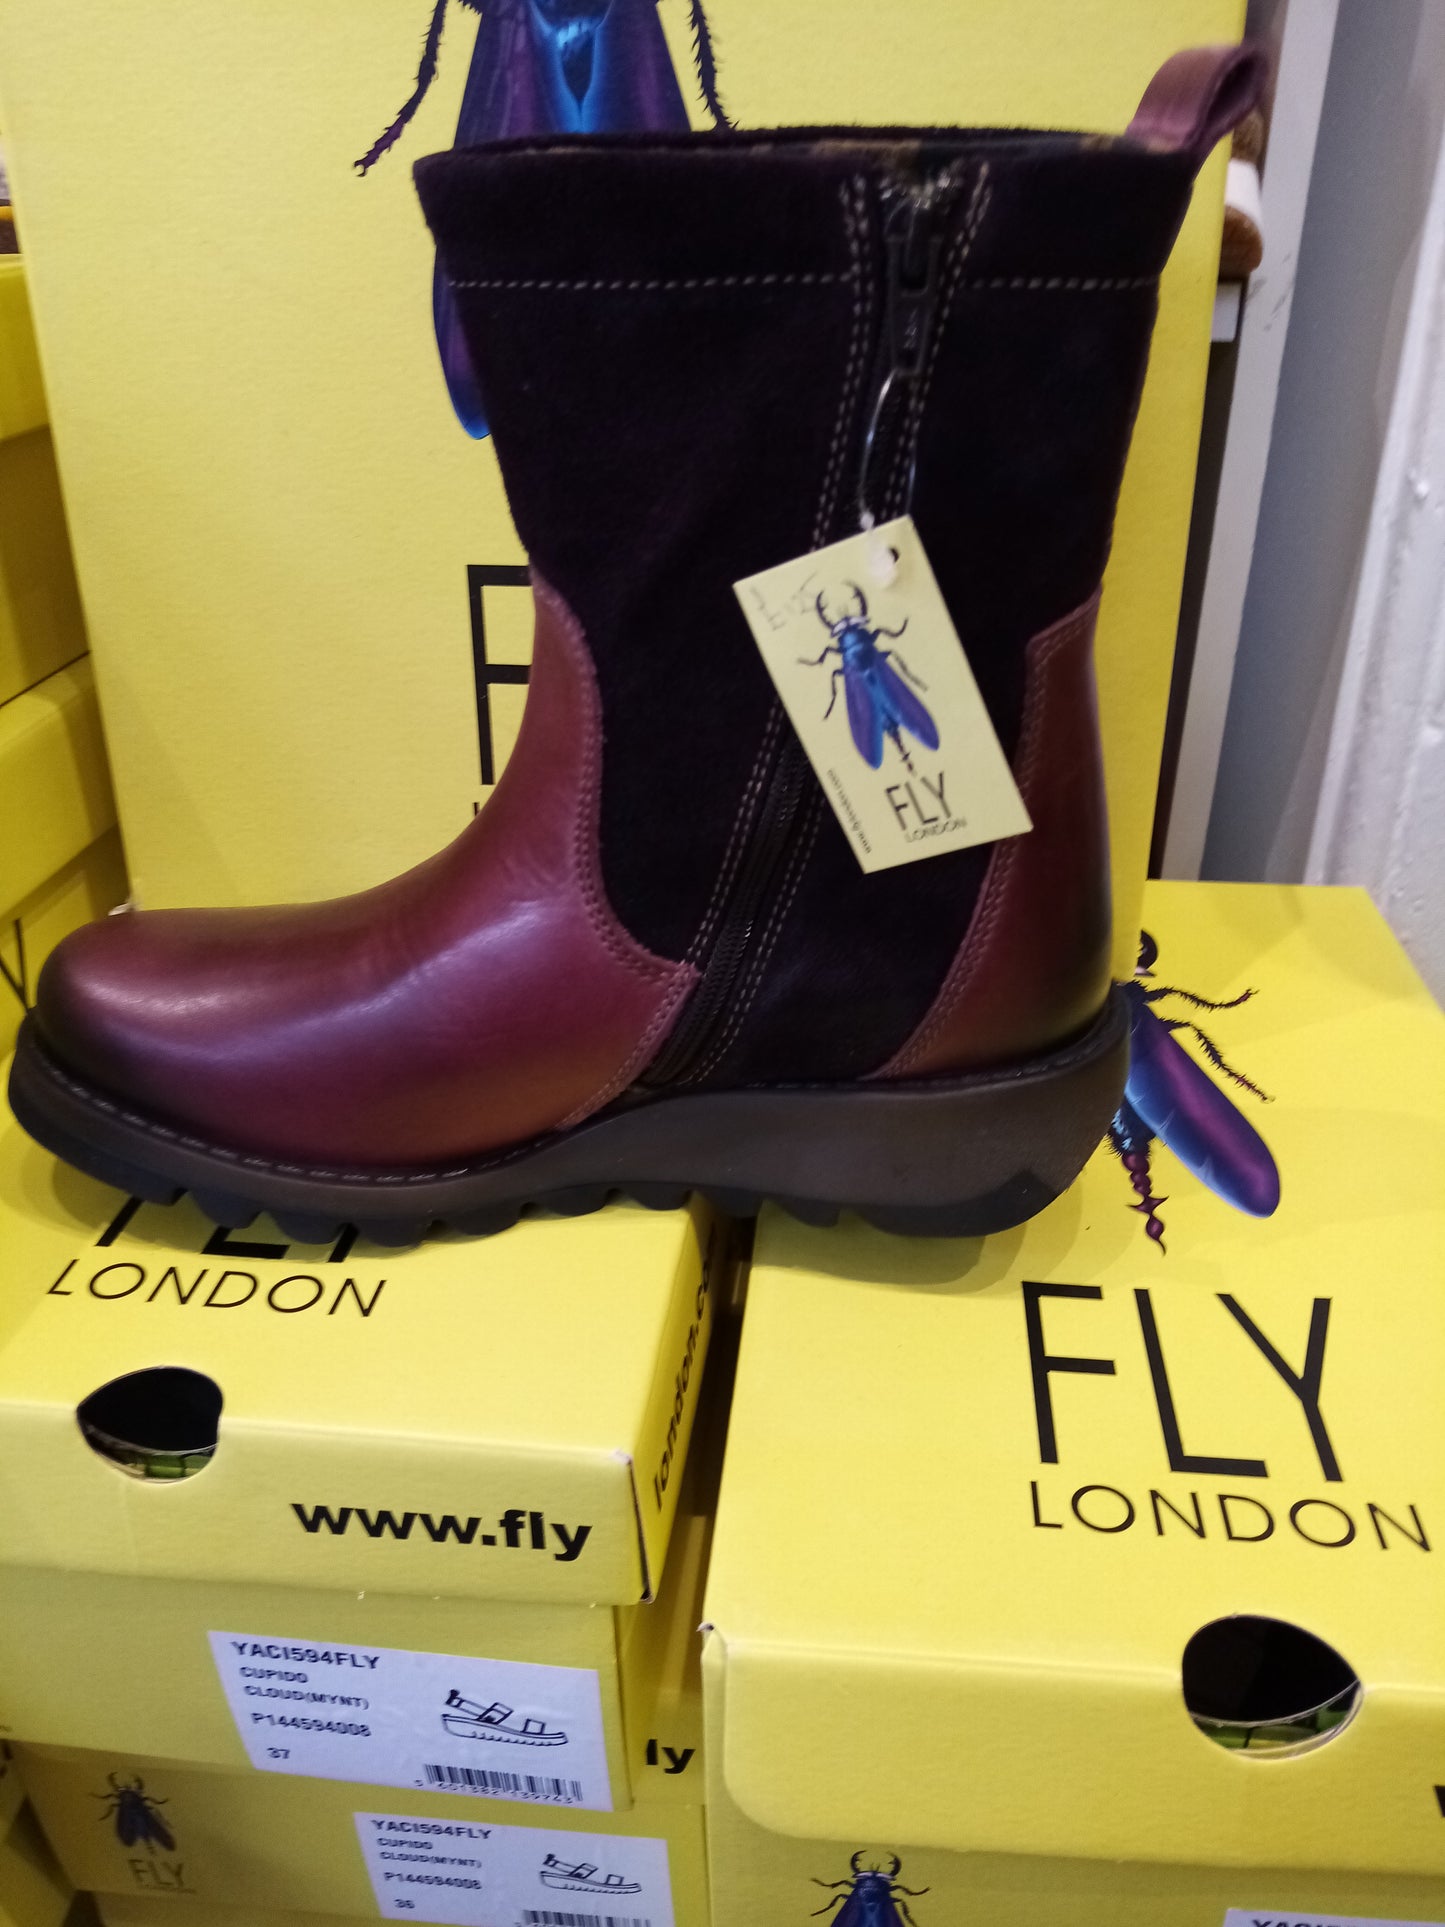 fly london rug oil purple great boots uk 4